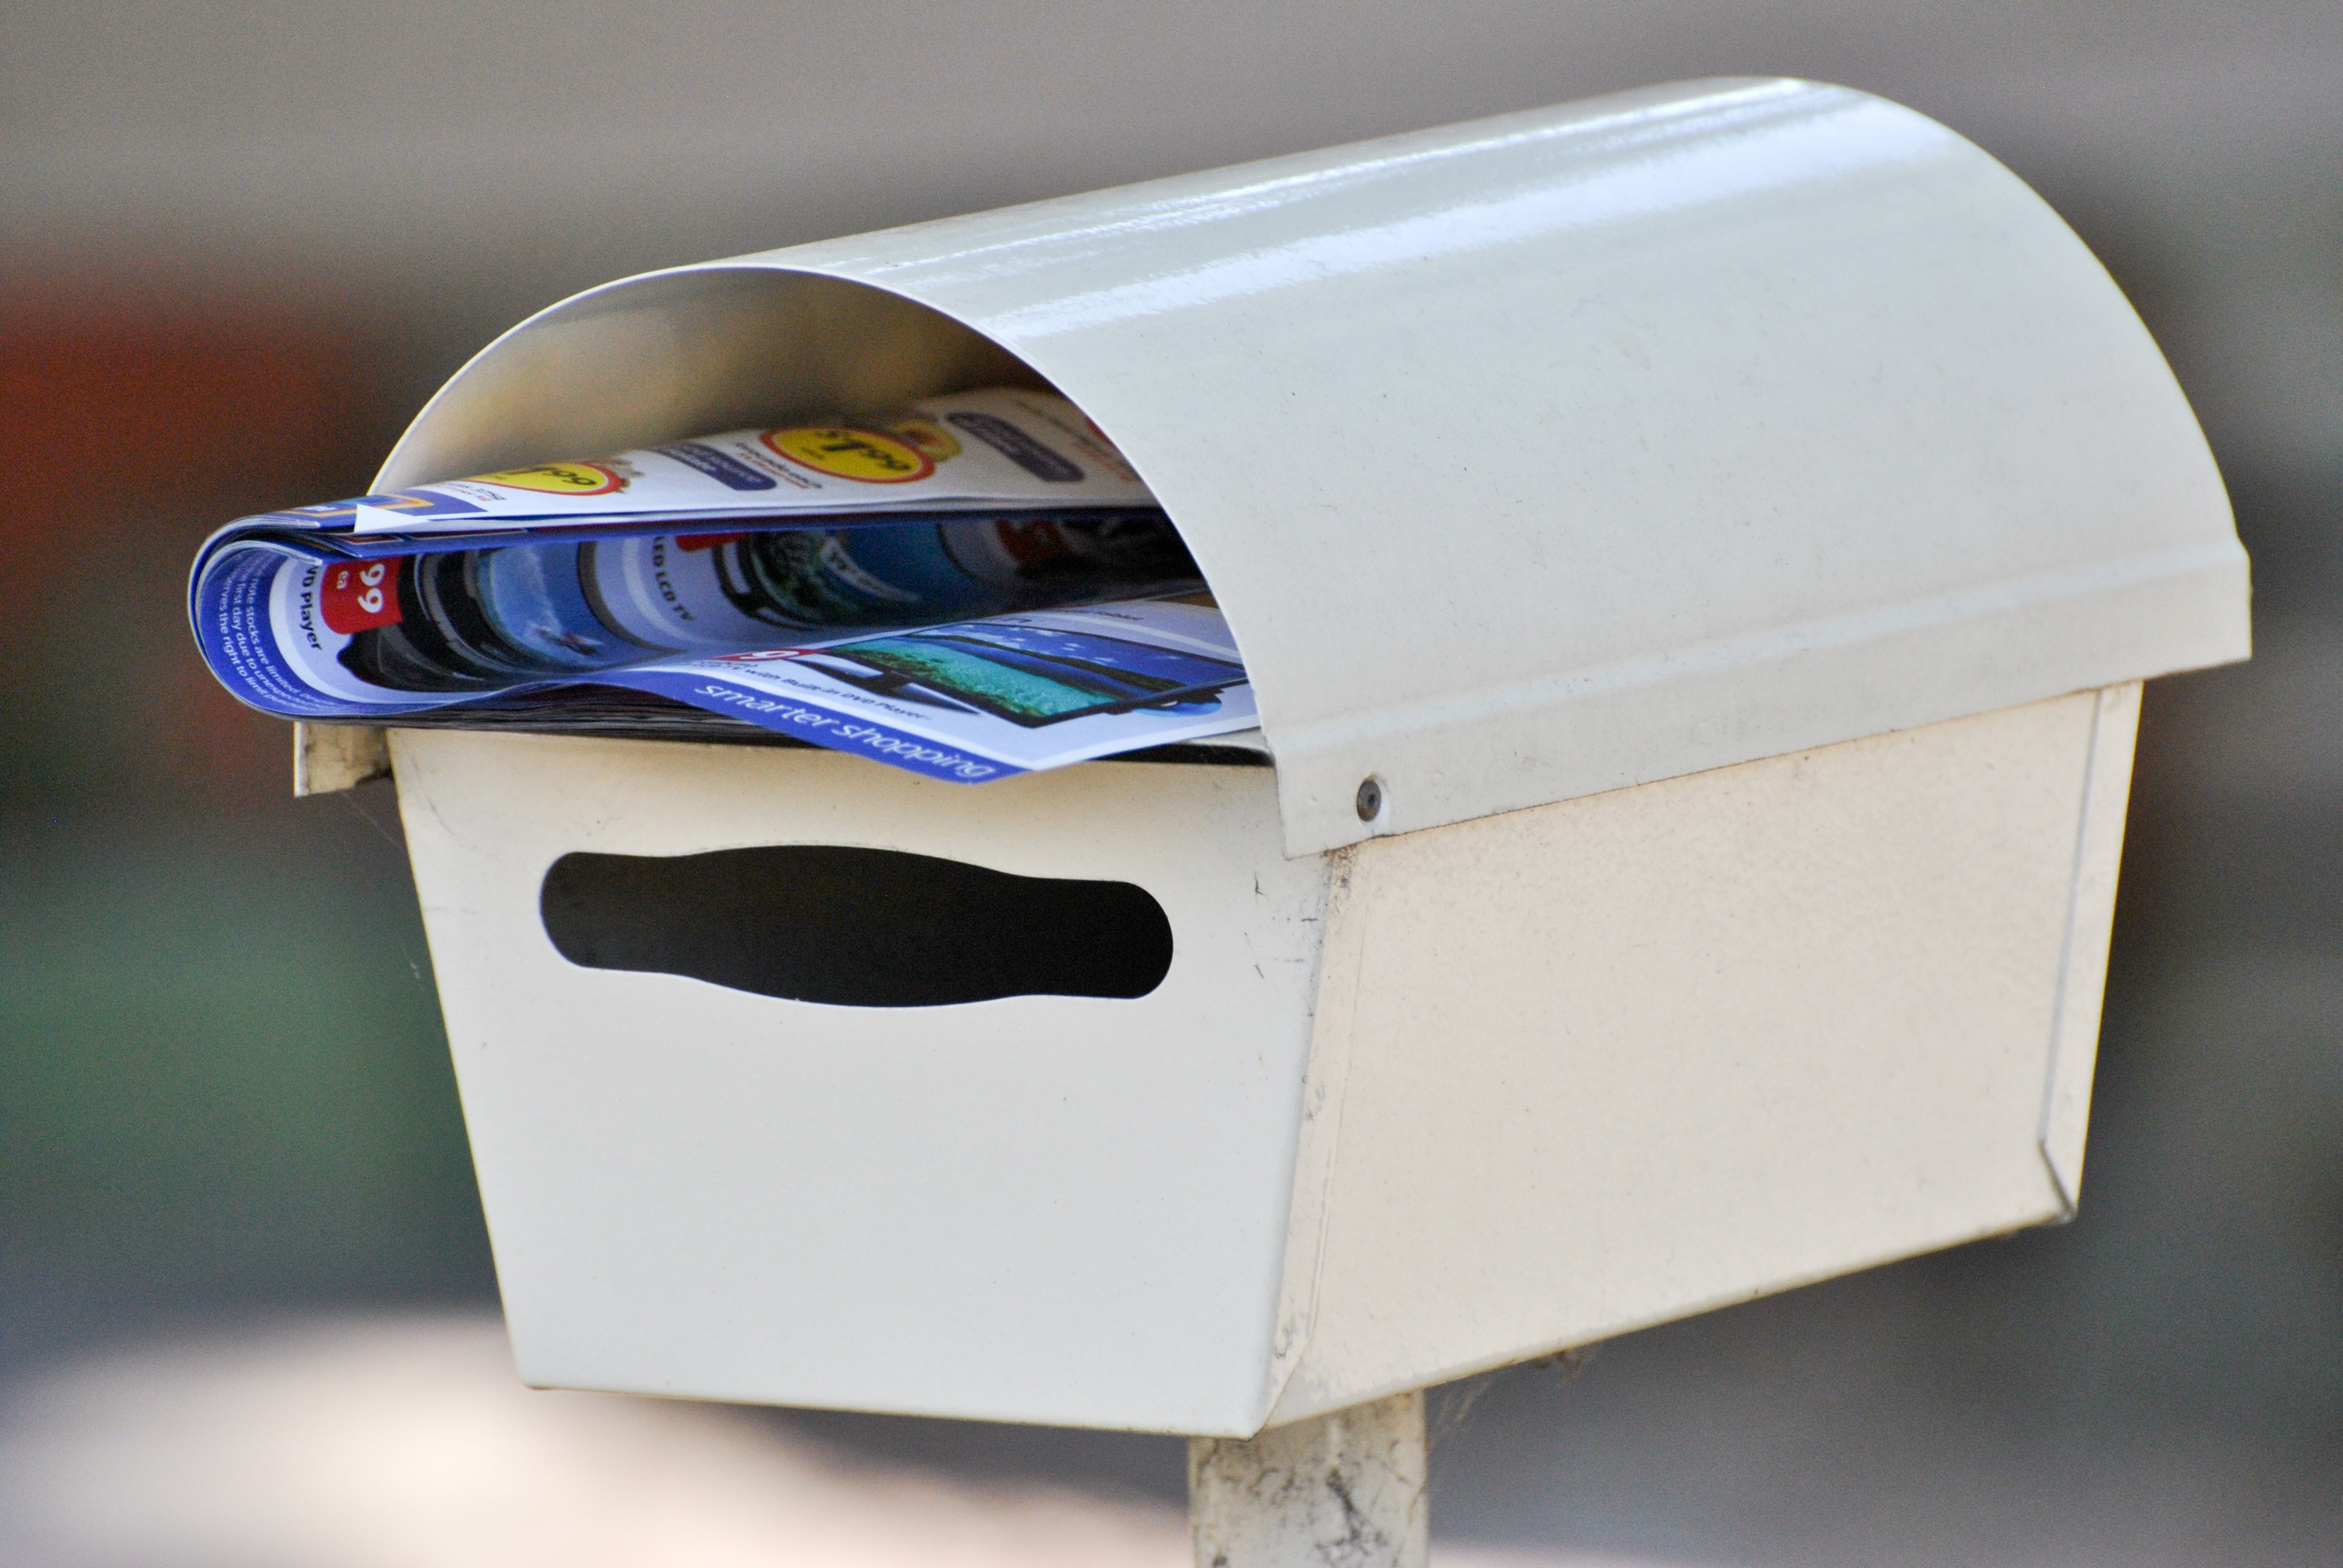 Mail in a mailbox.